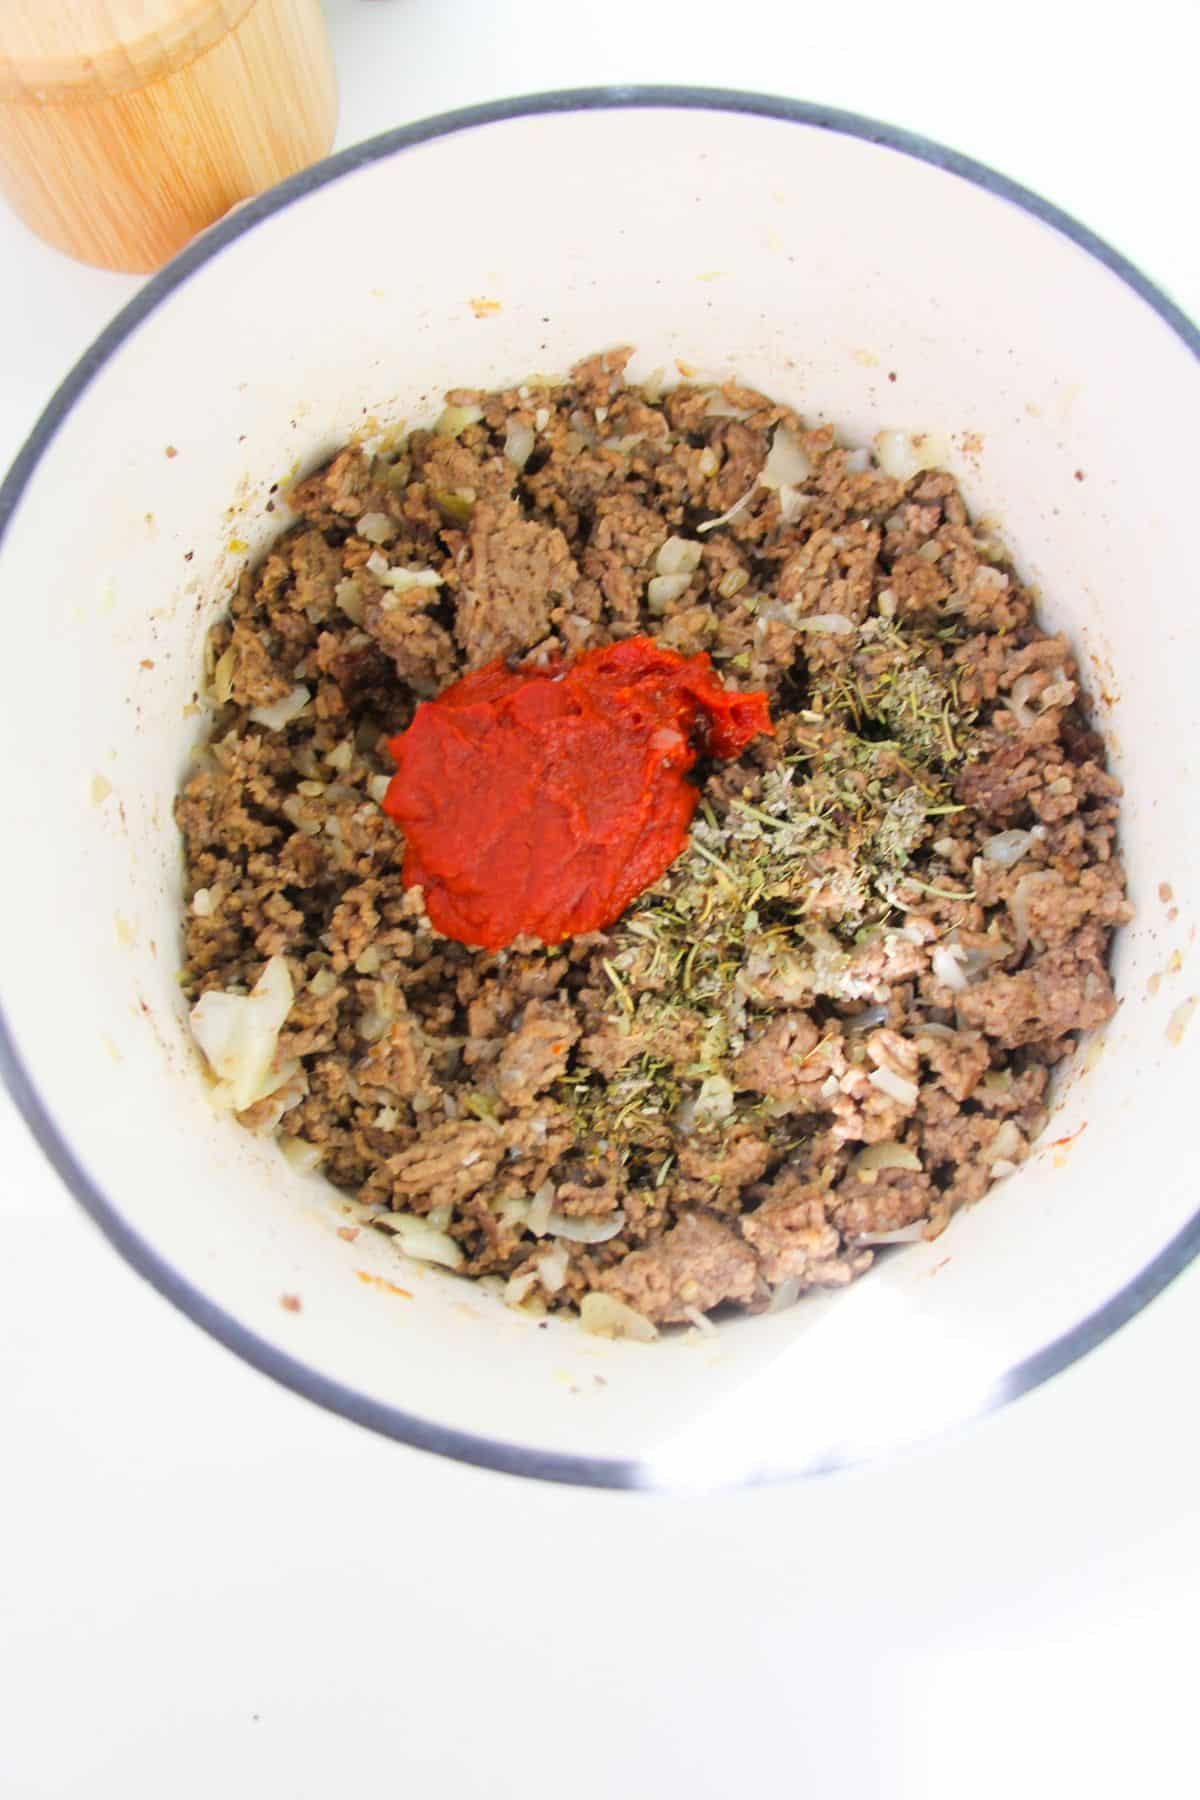 Tomato paste and seasoning are added to the meat mixture.